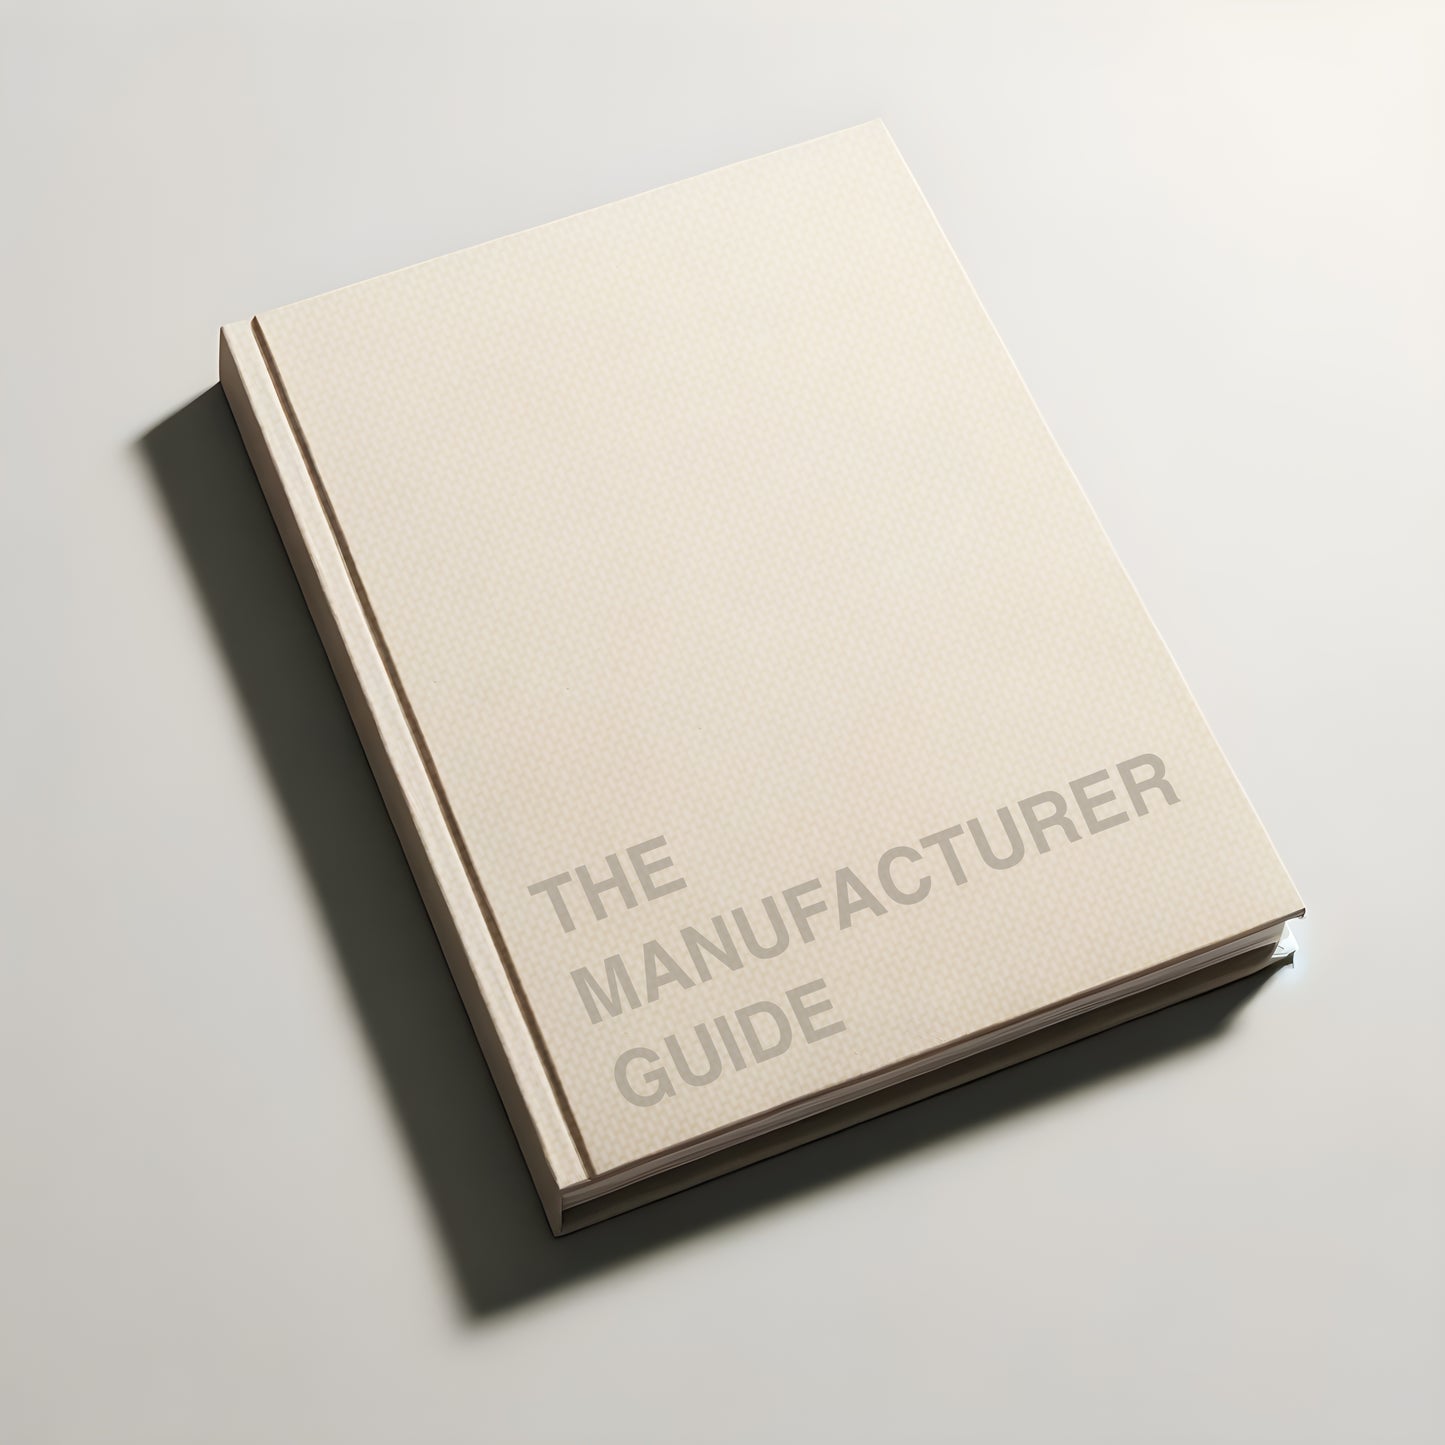 The Manufacturer Guide